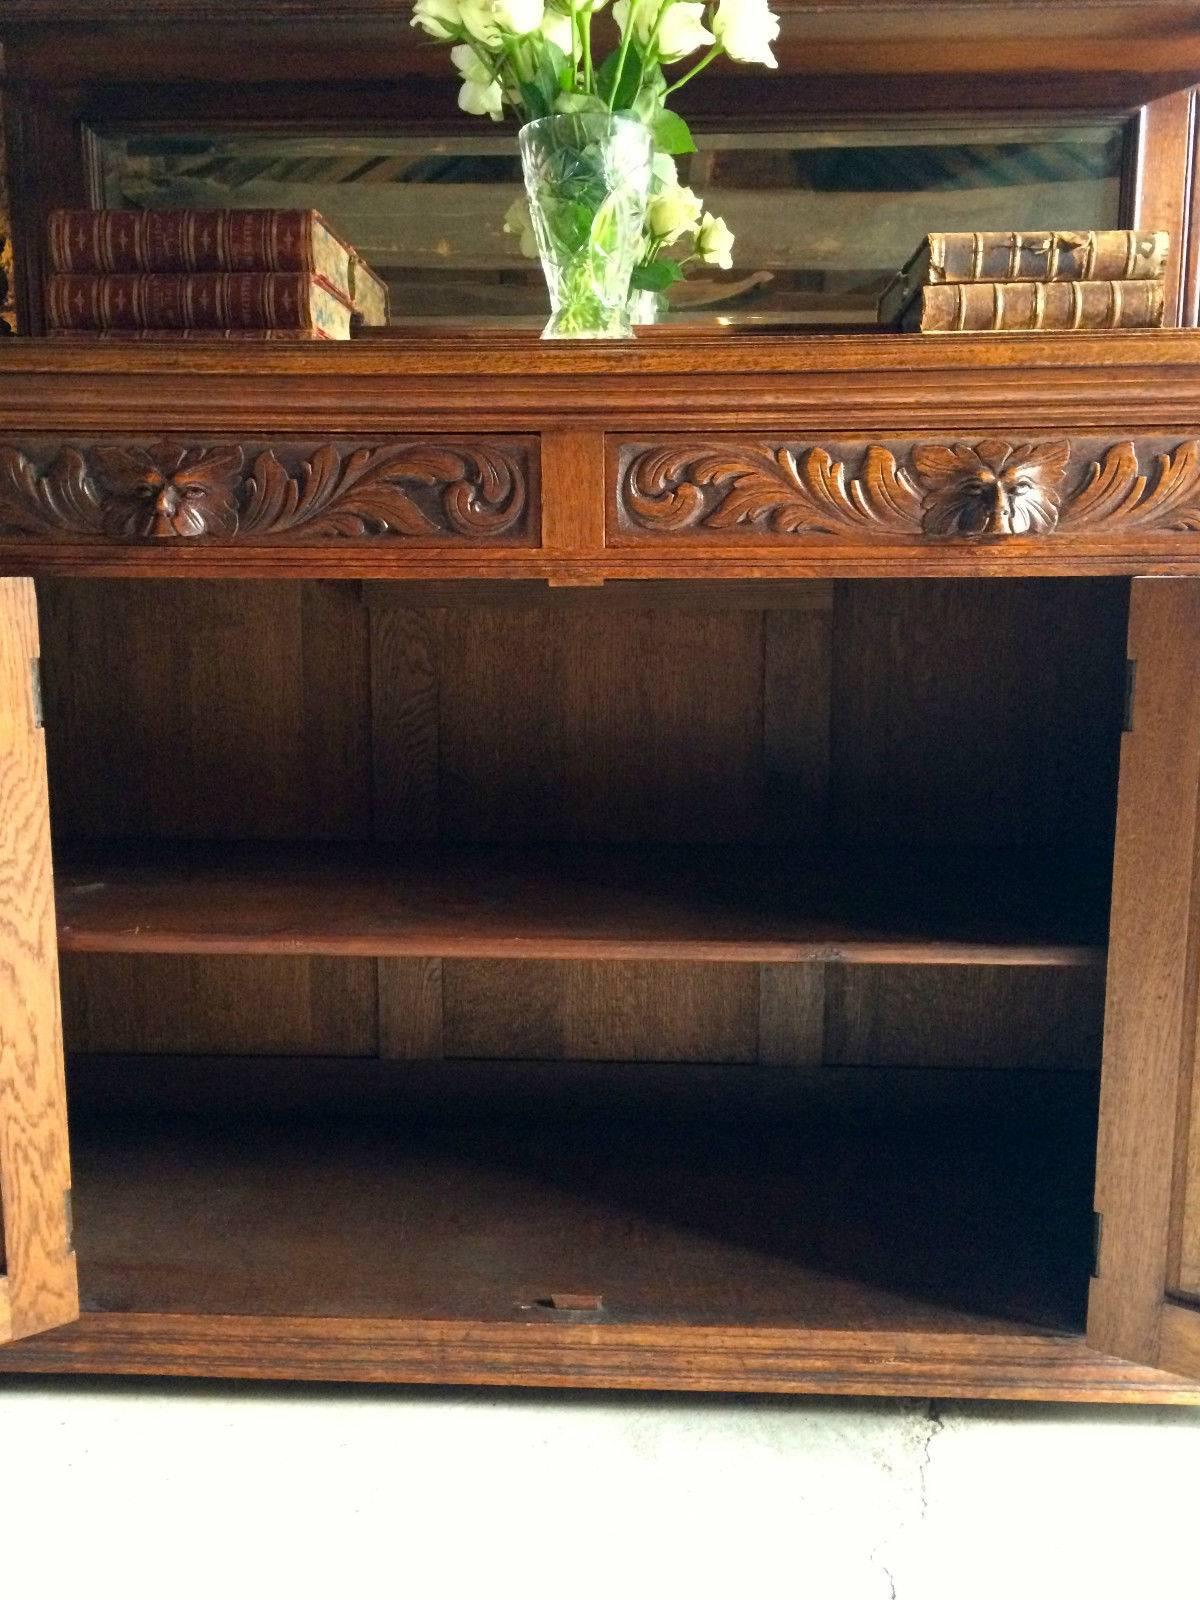 A beautiful antique Victorian Gothic Revival carved solid oak sideboard dresser with “Green Man